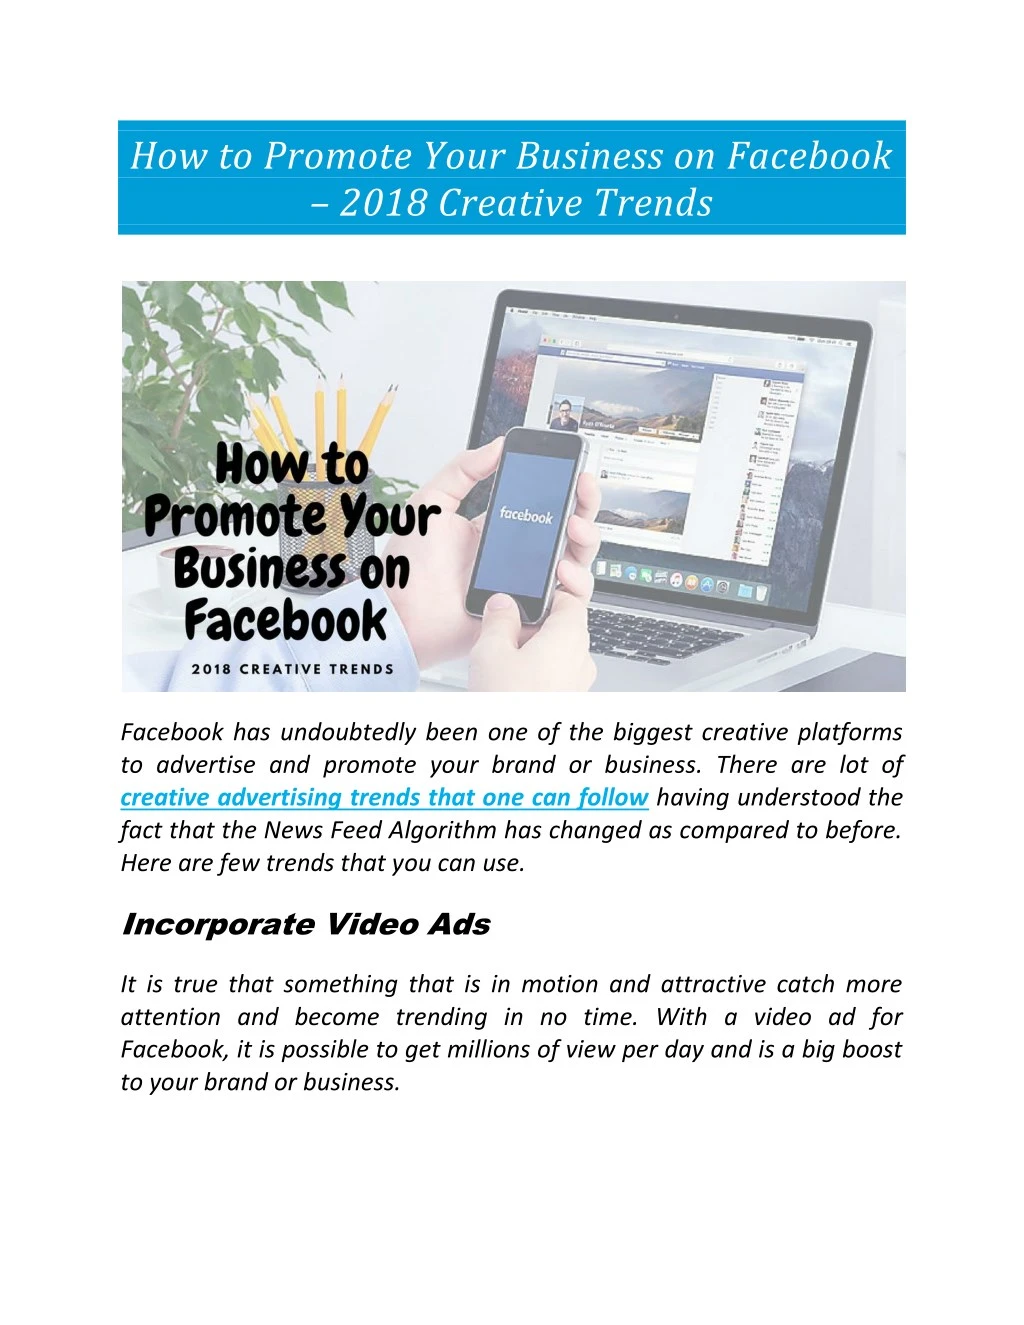 how to promote your business on facebook 2018